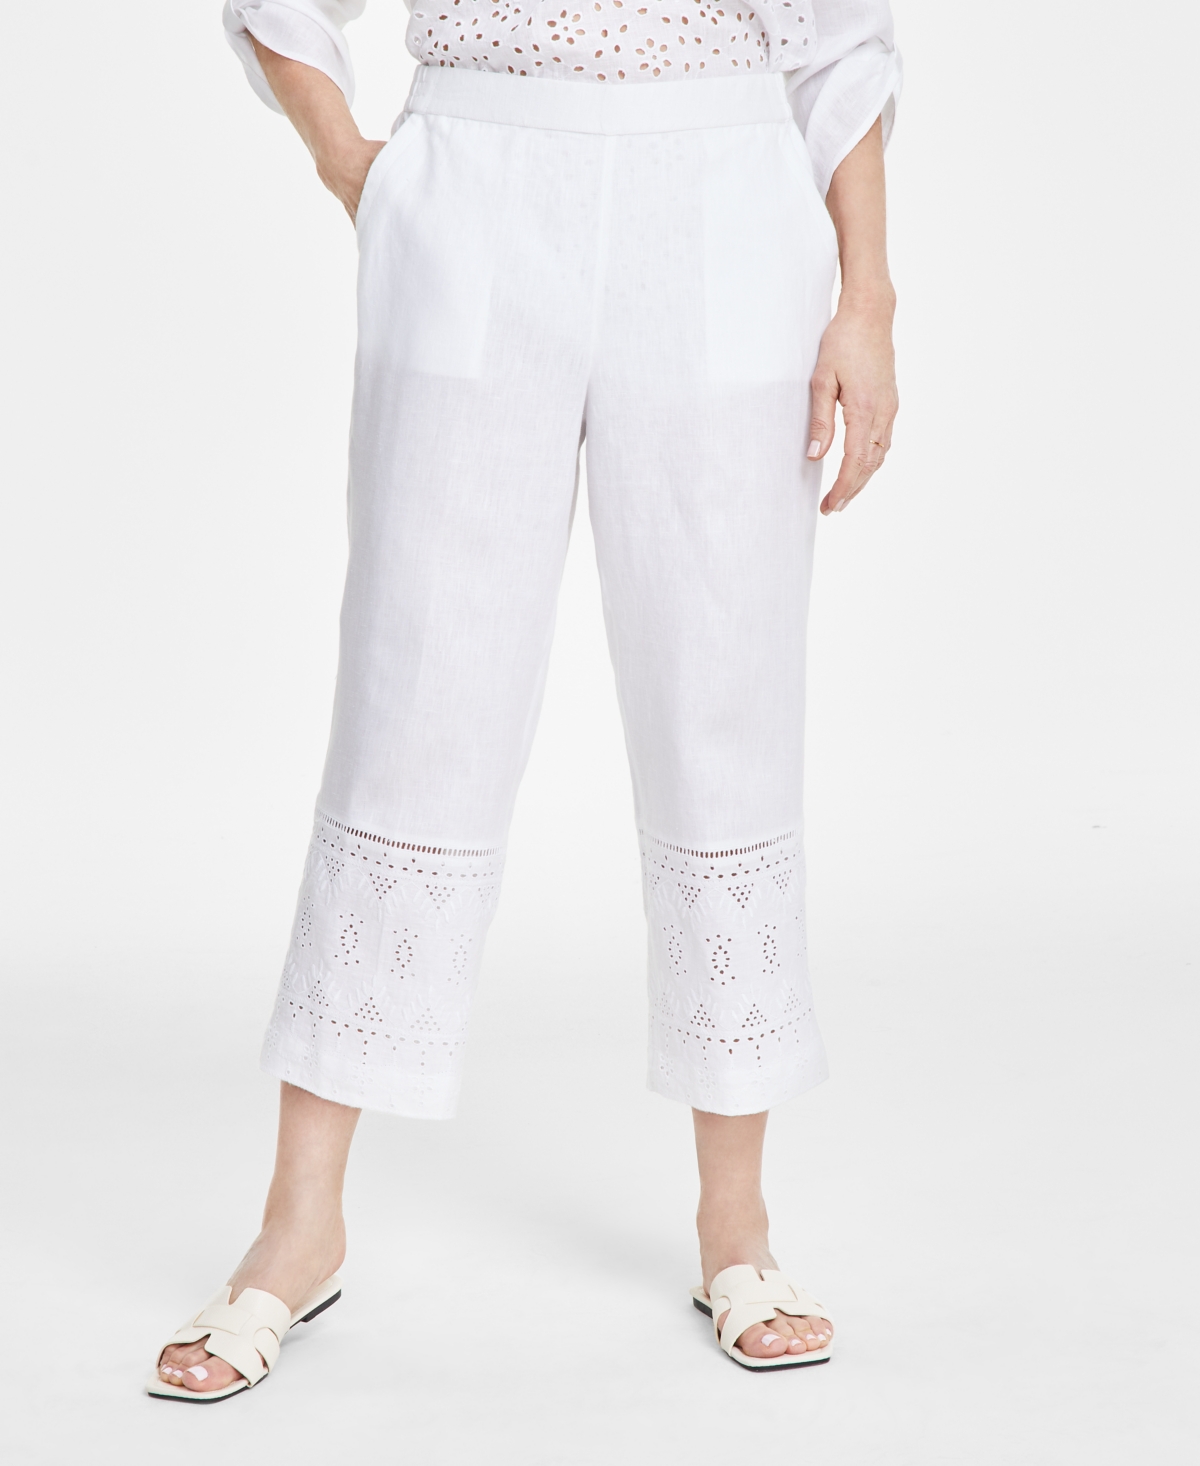 Women's 100% Linen Cropped Eyelet Pull-On Pants, Created for Macy's - Bright White